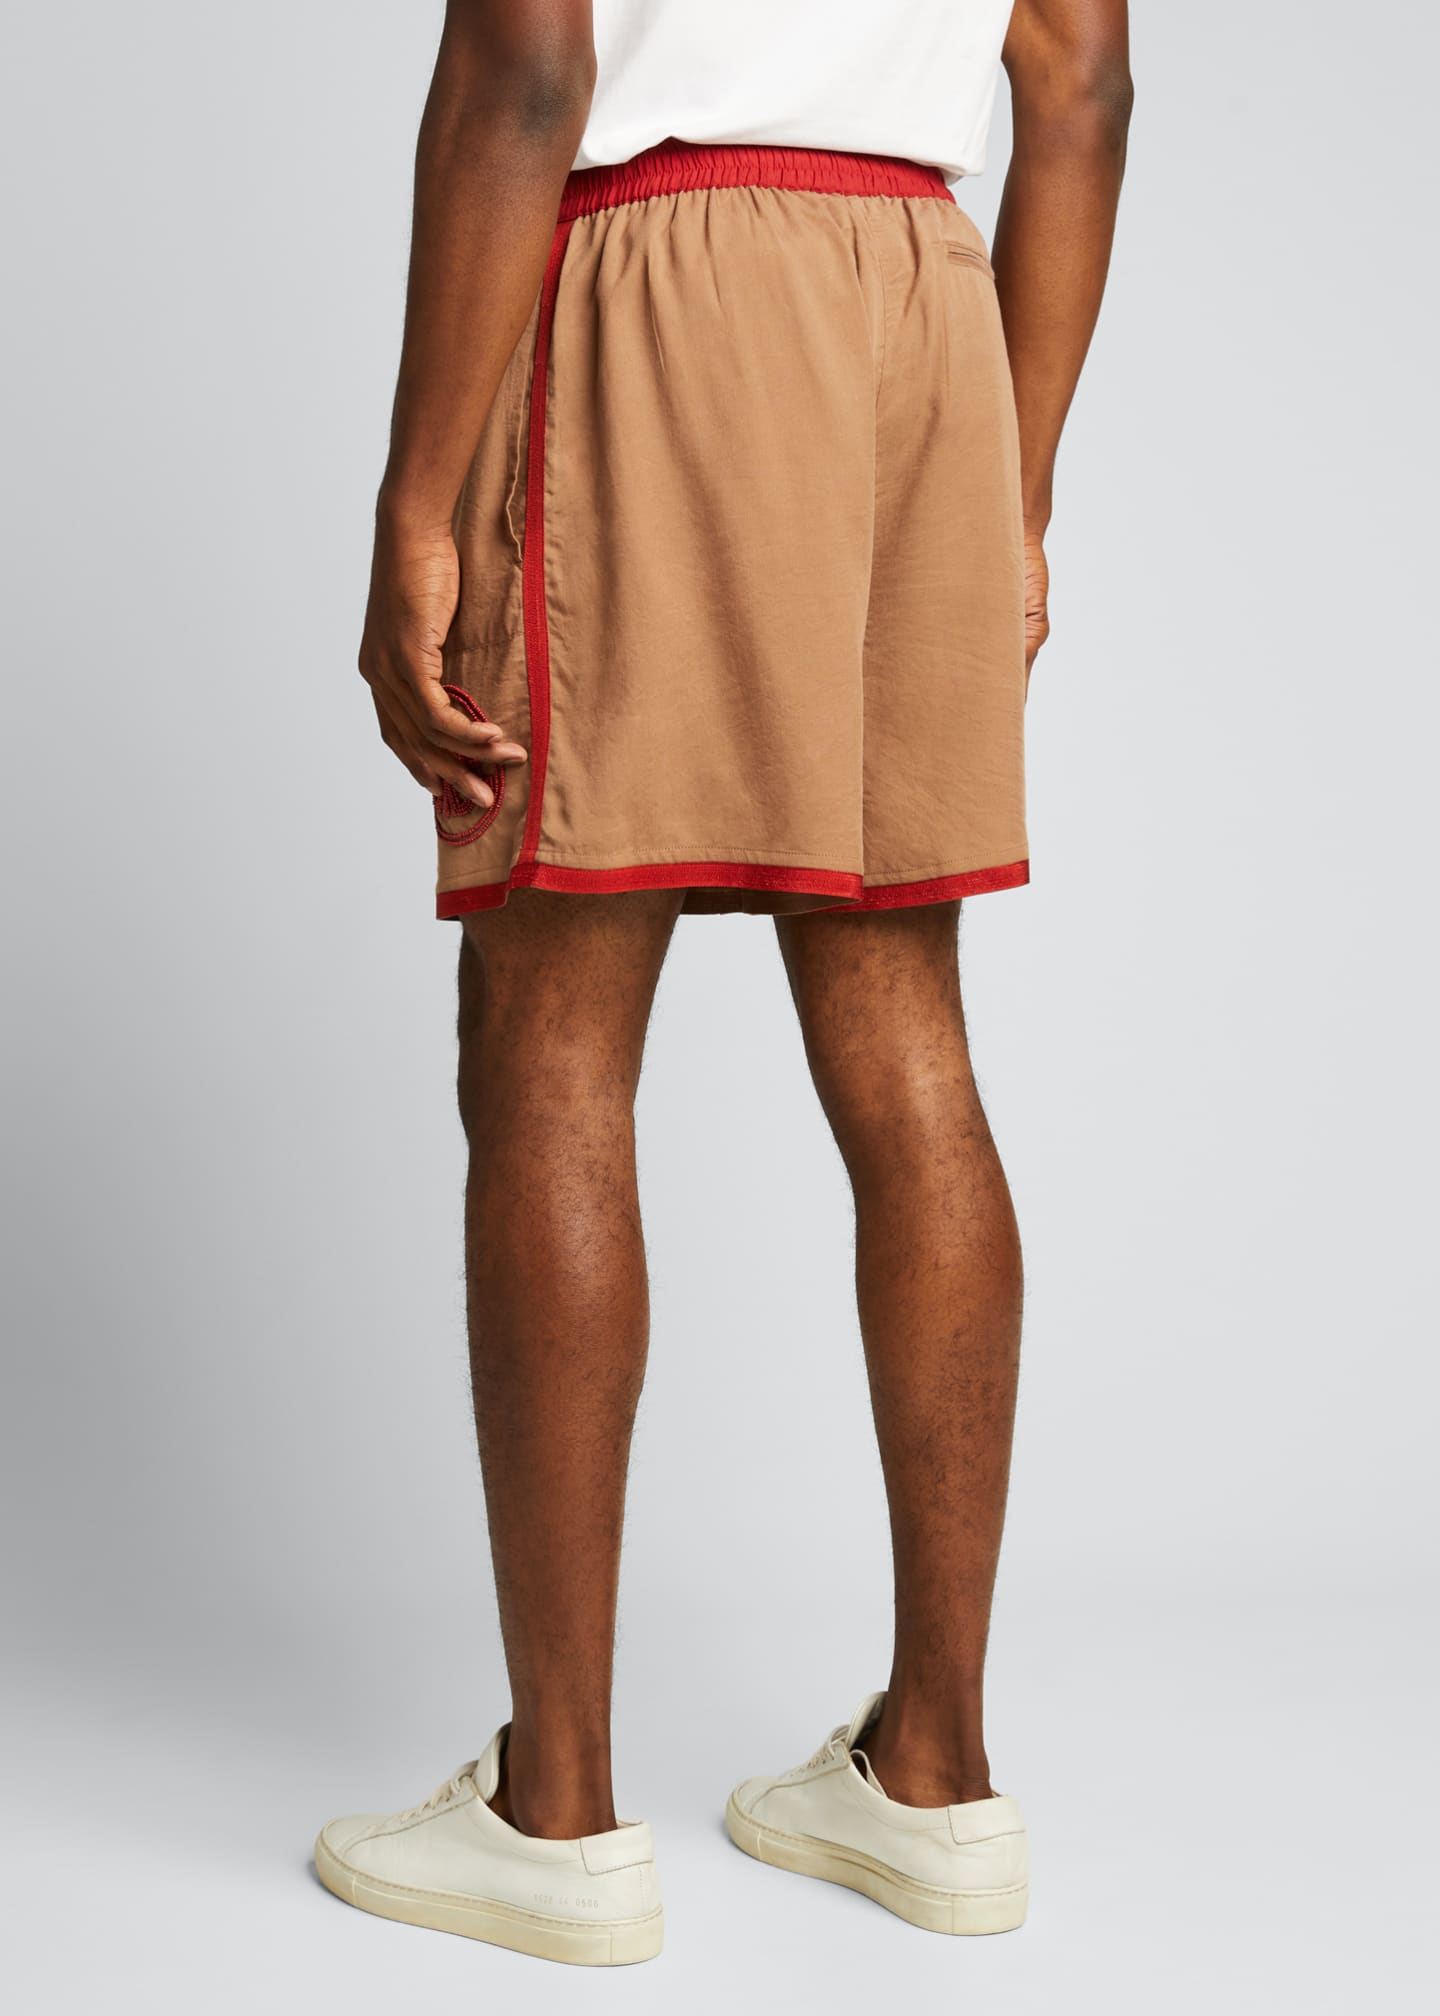 Bode Men's Rugby Shorts with Beaded Logo - Bergdorf Goodman